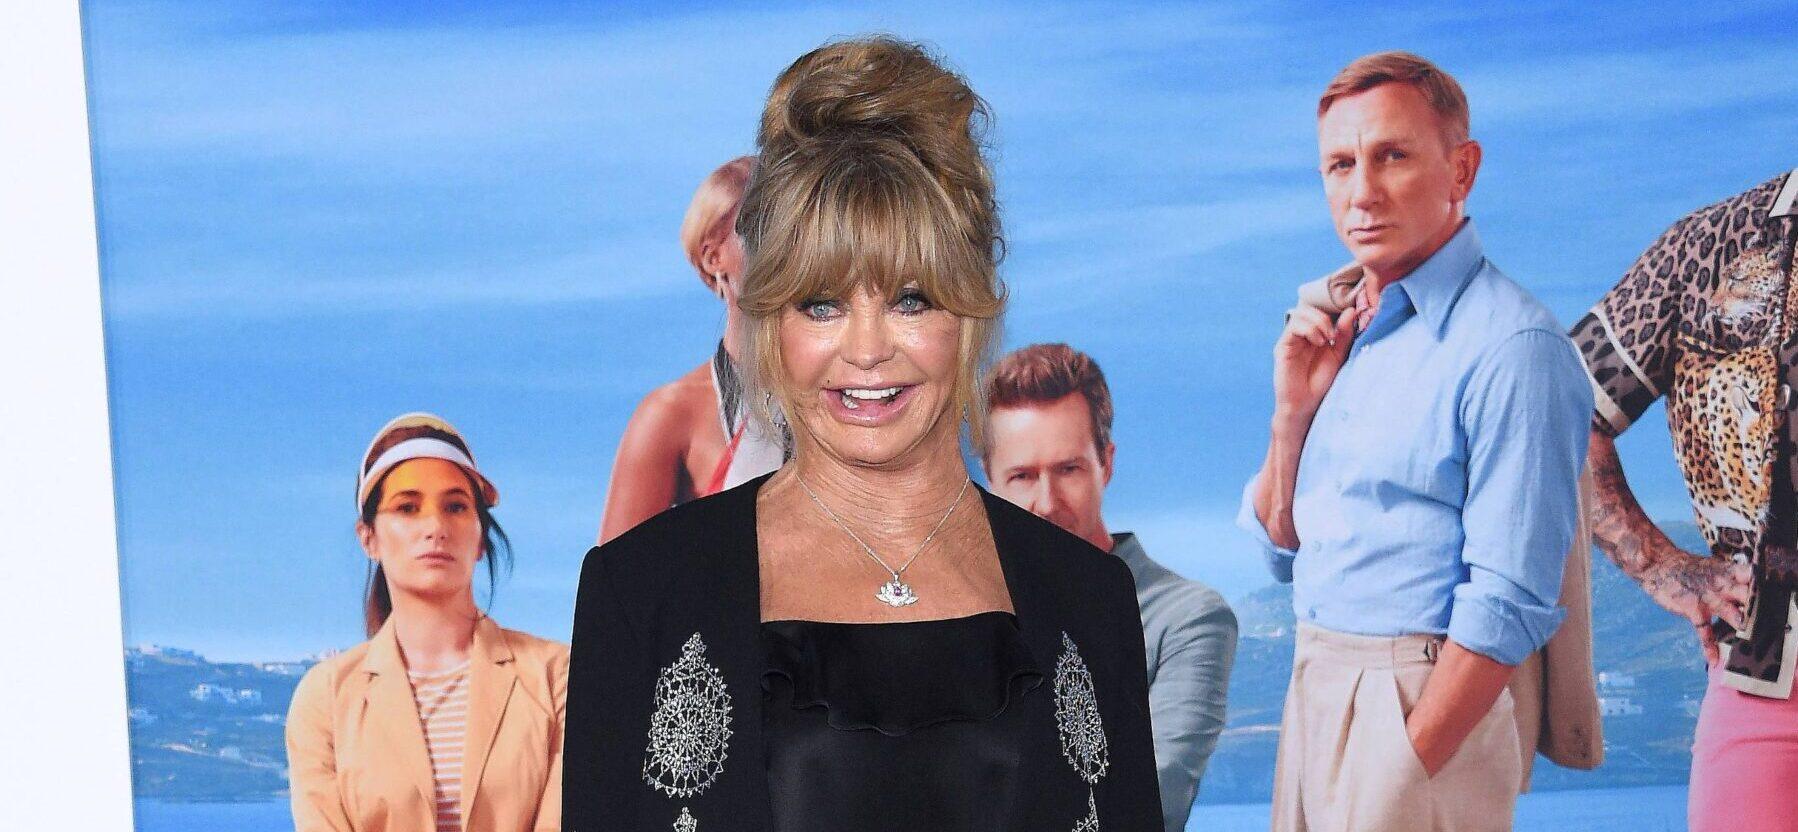 Goldie Hawn Tugs At Fans’ Heartstrings As She Freely Shows Off Dance Moves